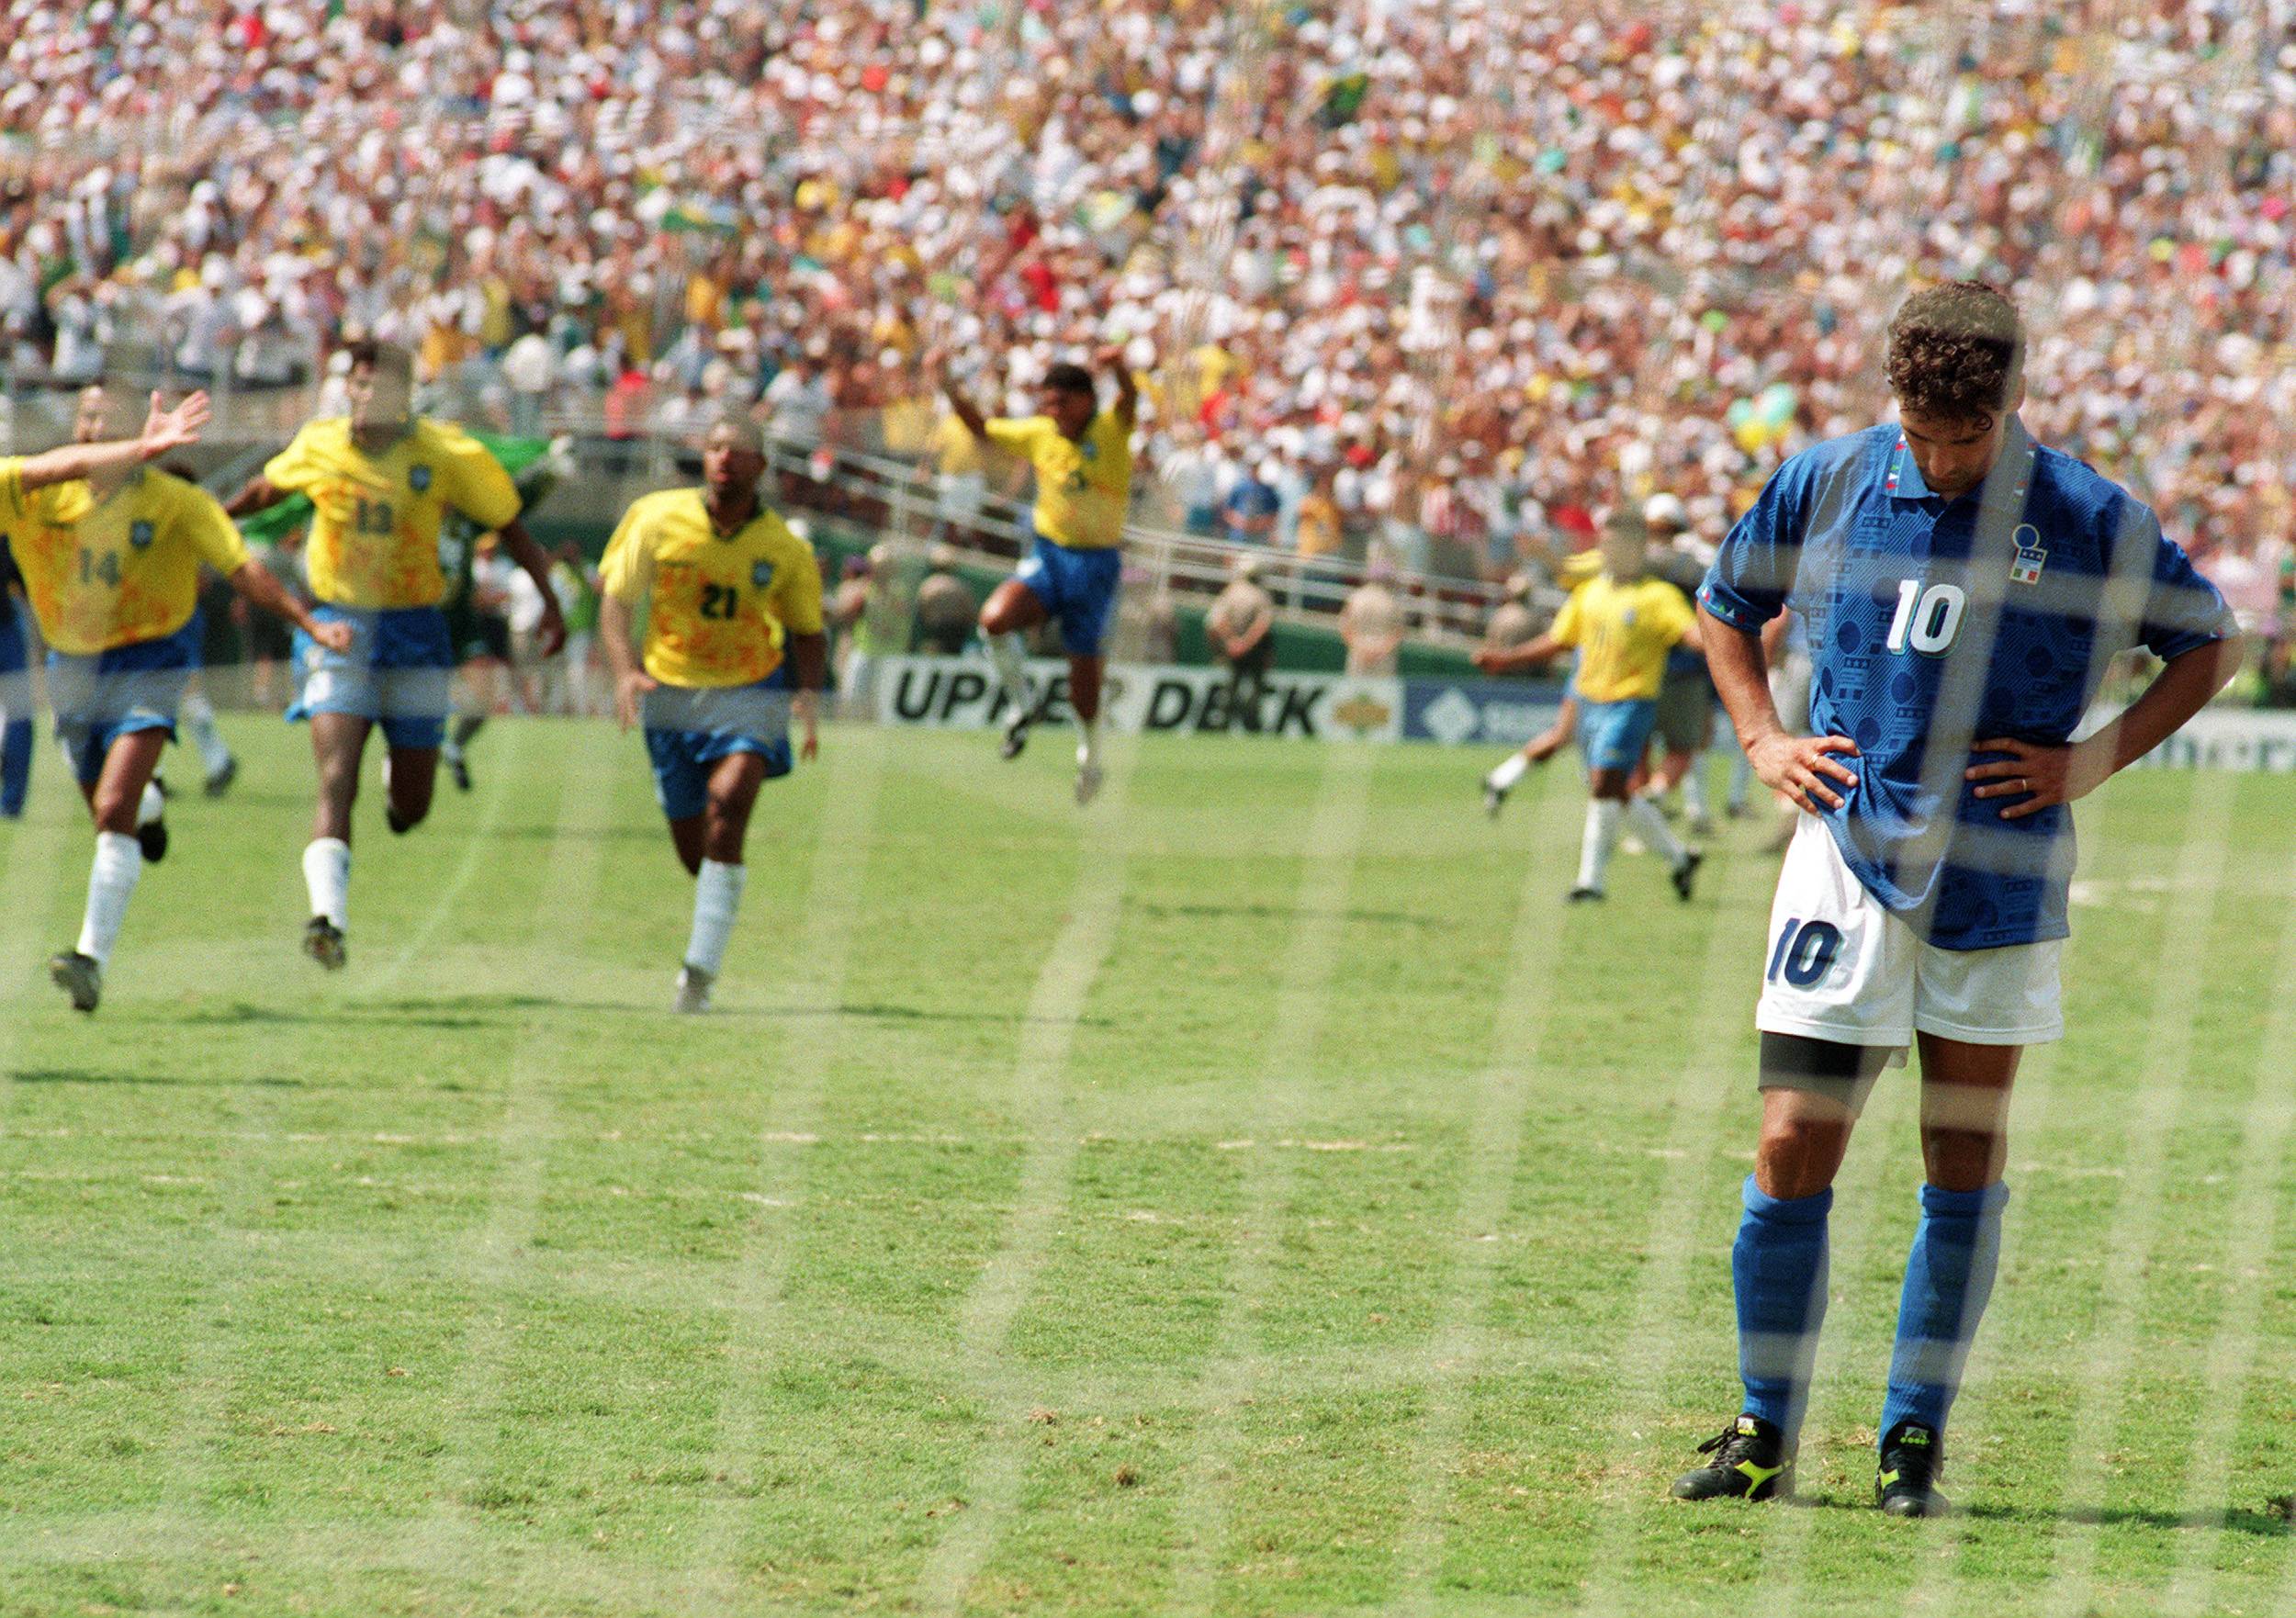 LOS ANGELES, UNITED STATES:  Brazilian players run to join their teammates as Italian midfielder Roberto Baggio bows his head after he missed his penalty kick giving Brazil a 3-2 victory in the shoot-out session (0-0 after extra time) at the end of the World Cup final, 17 July 1994 at the Rose Bowl in Pasadena. Brazil won its fourth World Cup title after 1958, 1962 and 1970.   AFP PHOTO/OMAR TORRES (Photo credit should read OMAR TORRES/AFP/Getty Images)